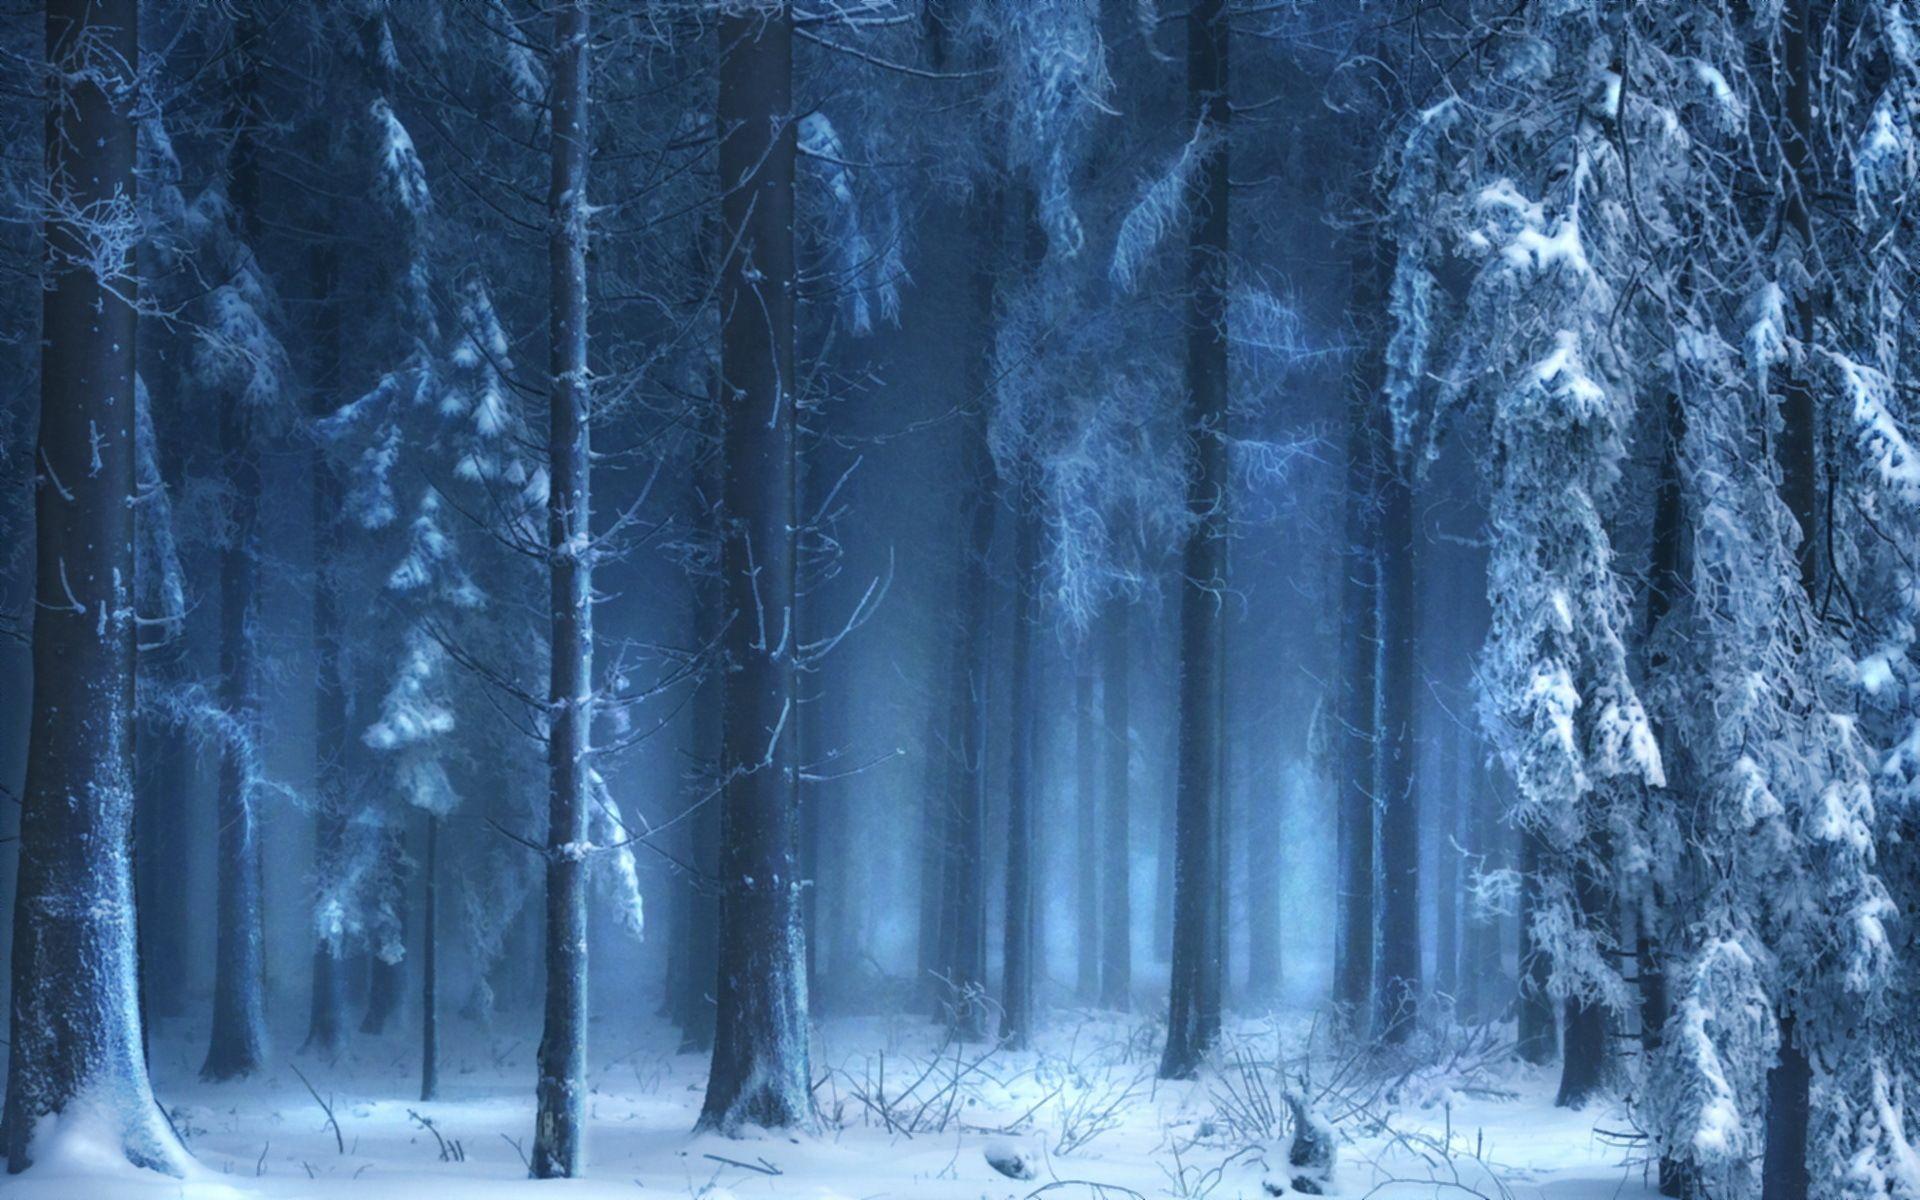 Landscapes trees forest woods winter snow wallpaperx1200. Winter snow wallpaper, Snowy forest, Winter wallpaper